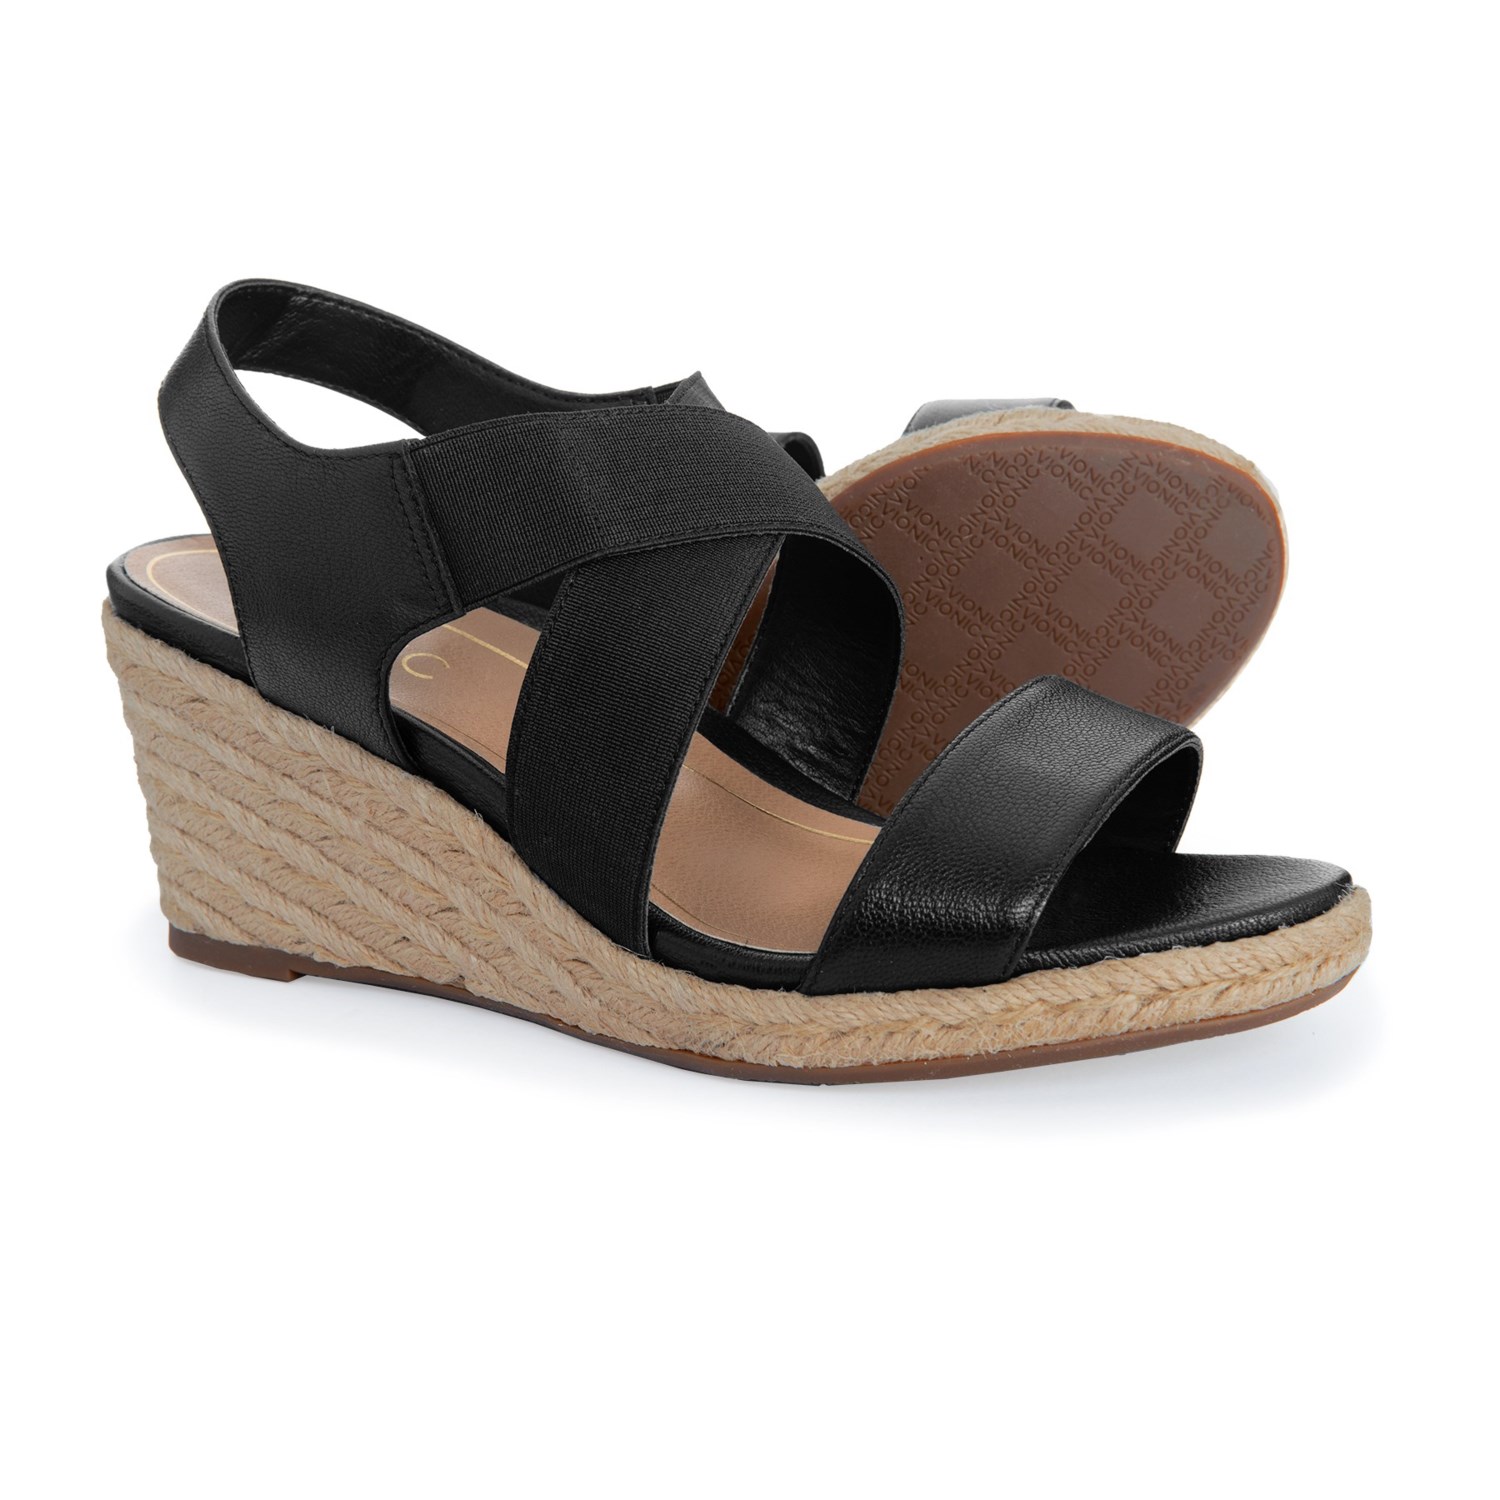 Vionic Orthaheel Technology Ainsleigh Wedge Sandals – Leather (For Women)